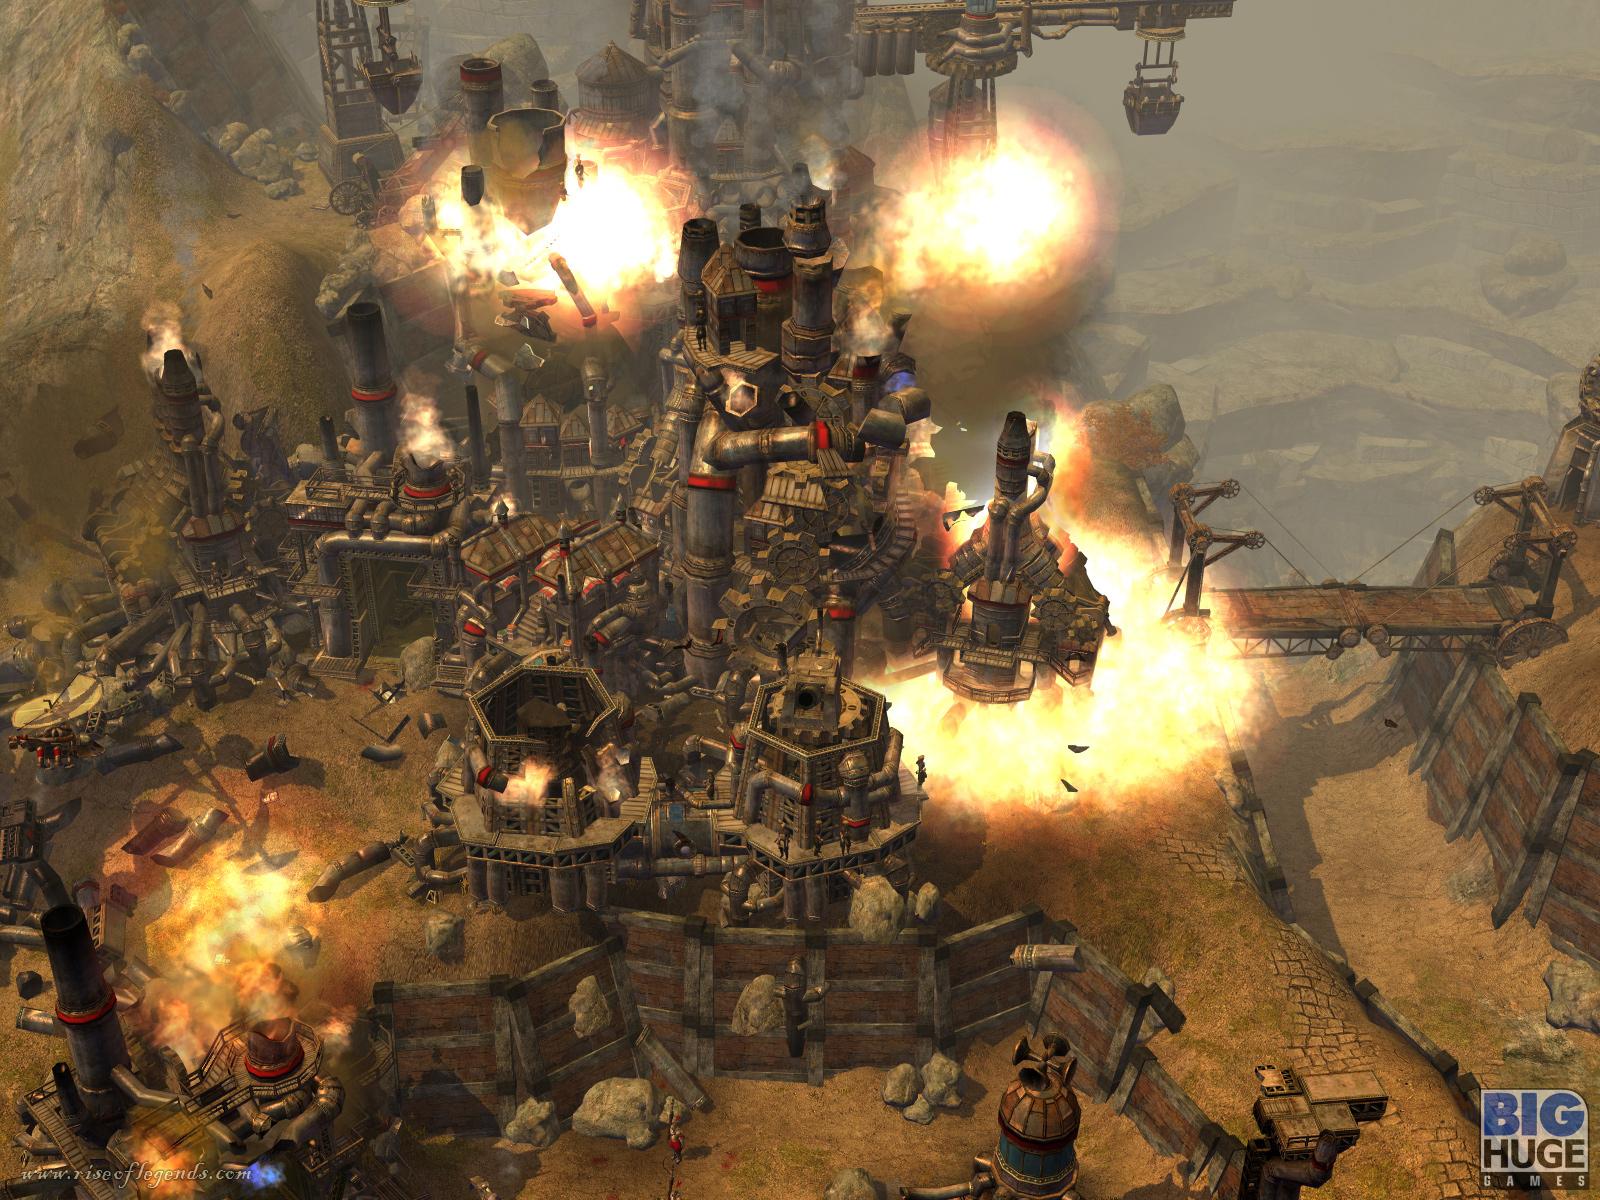 Photos Rise of Nations: Rise of Legends Games